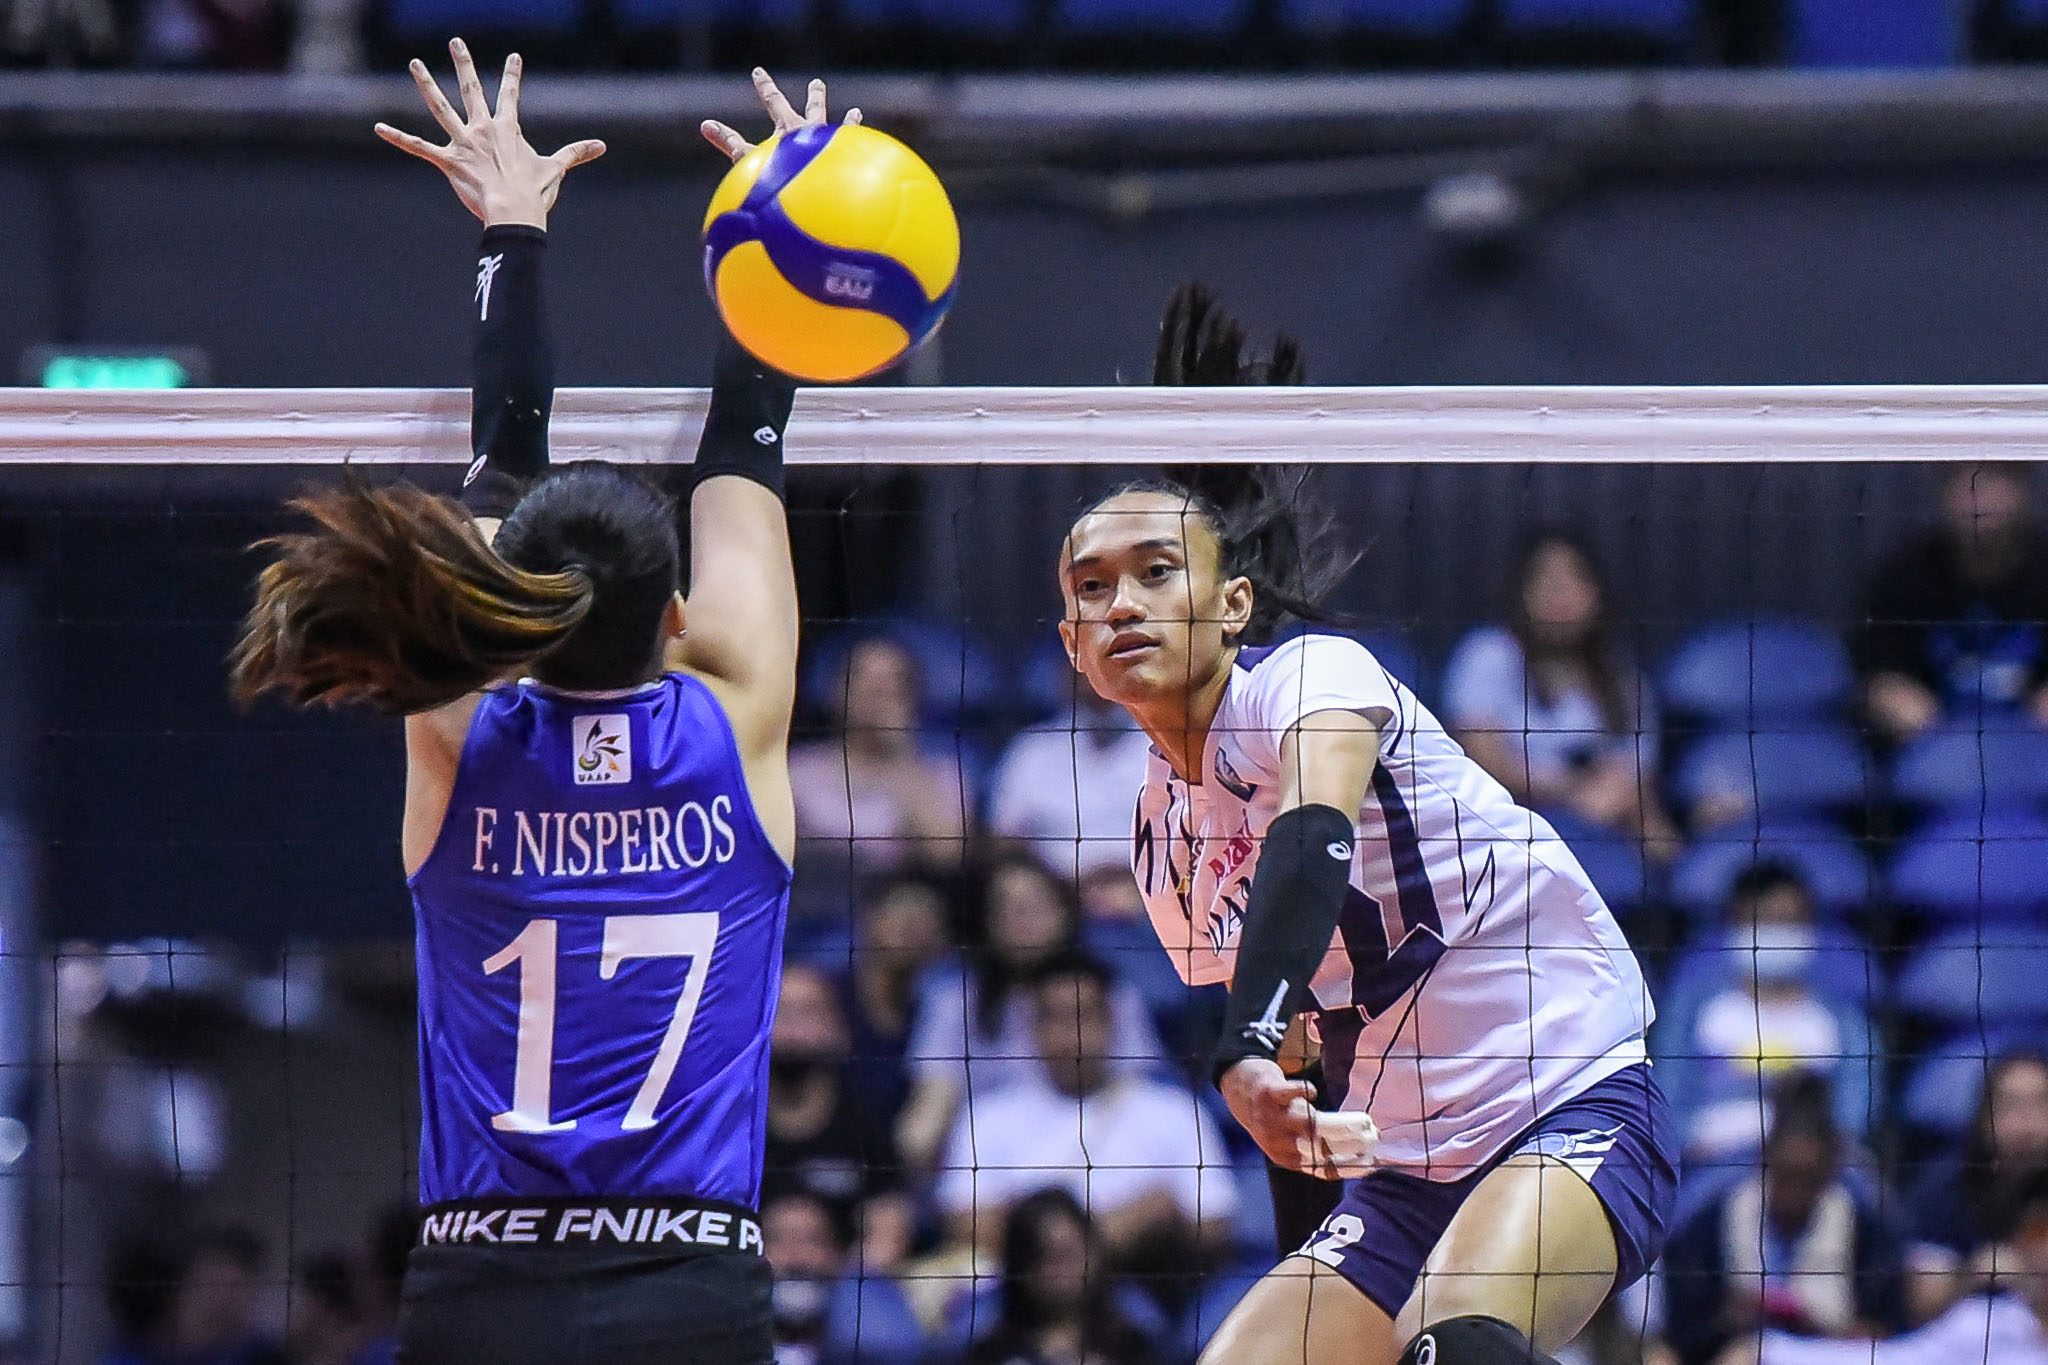 Adamson stays soaring, sweeps Ateneo series for 1st time in 14 years